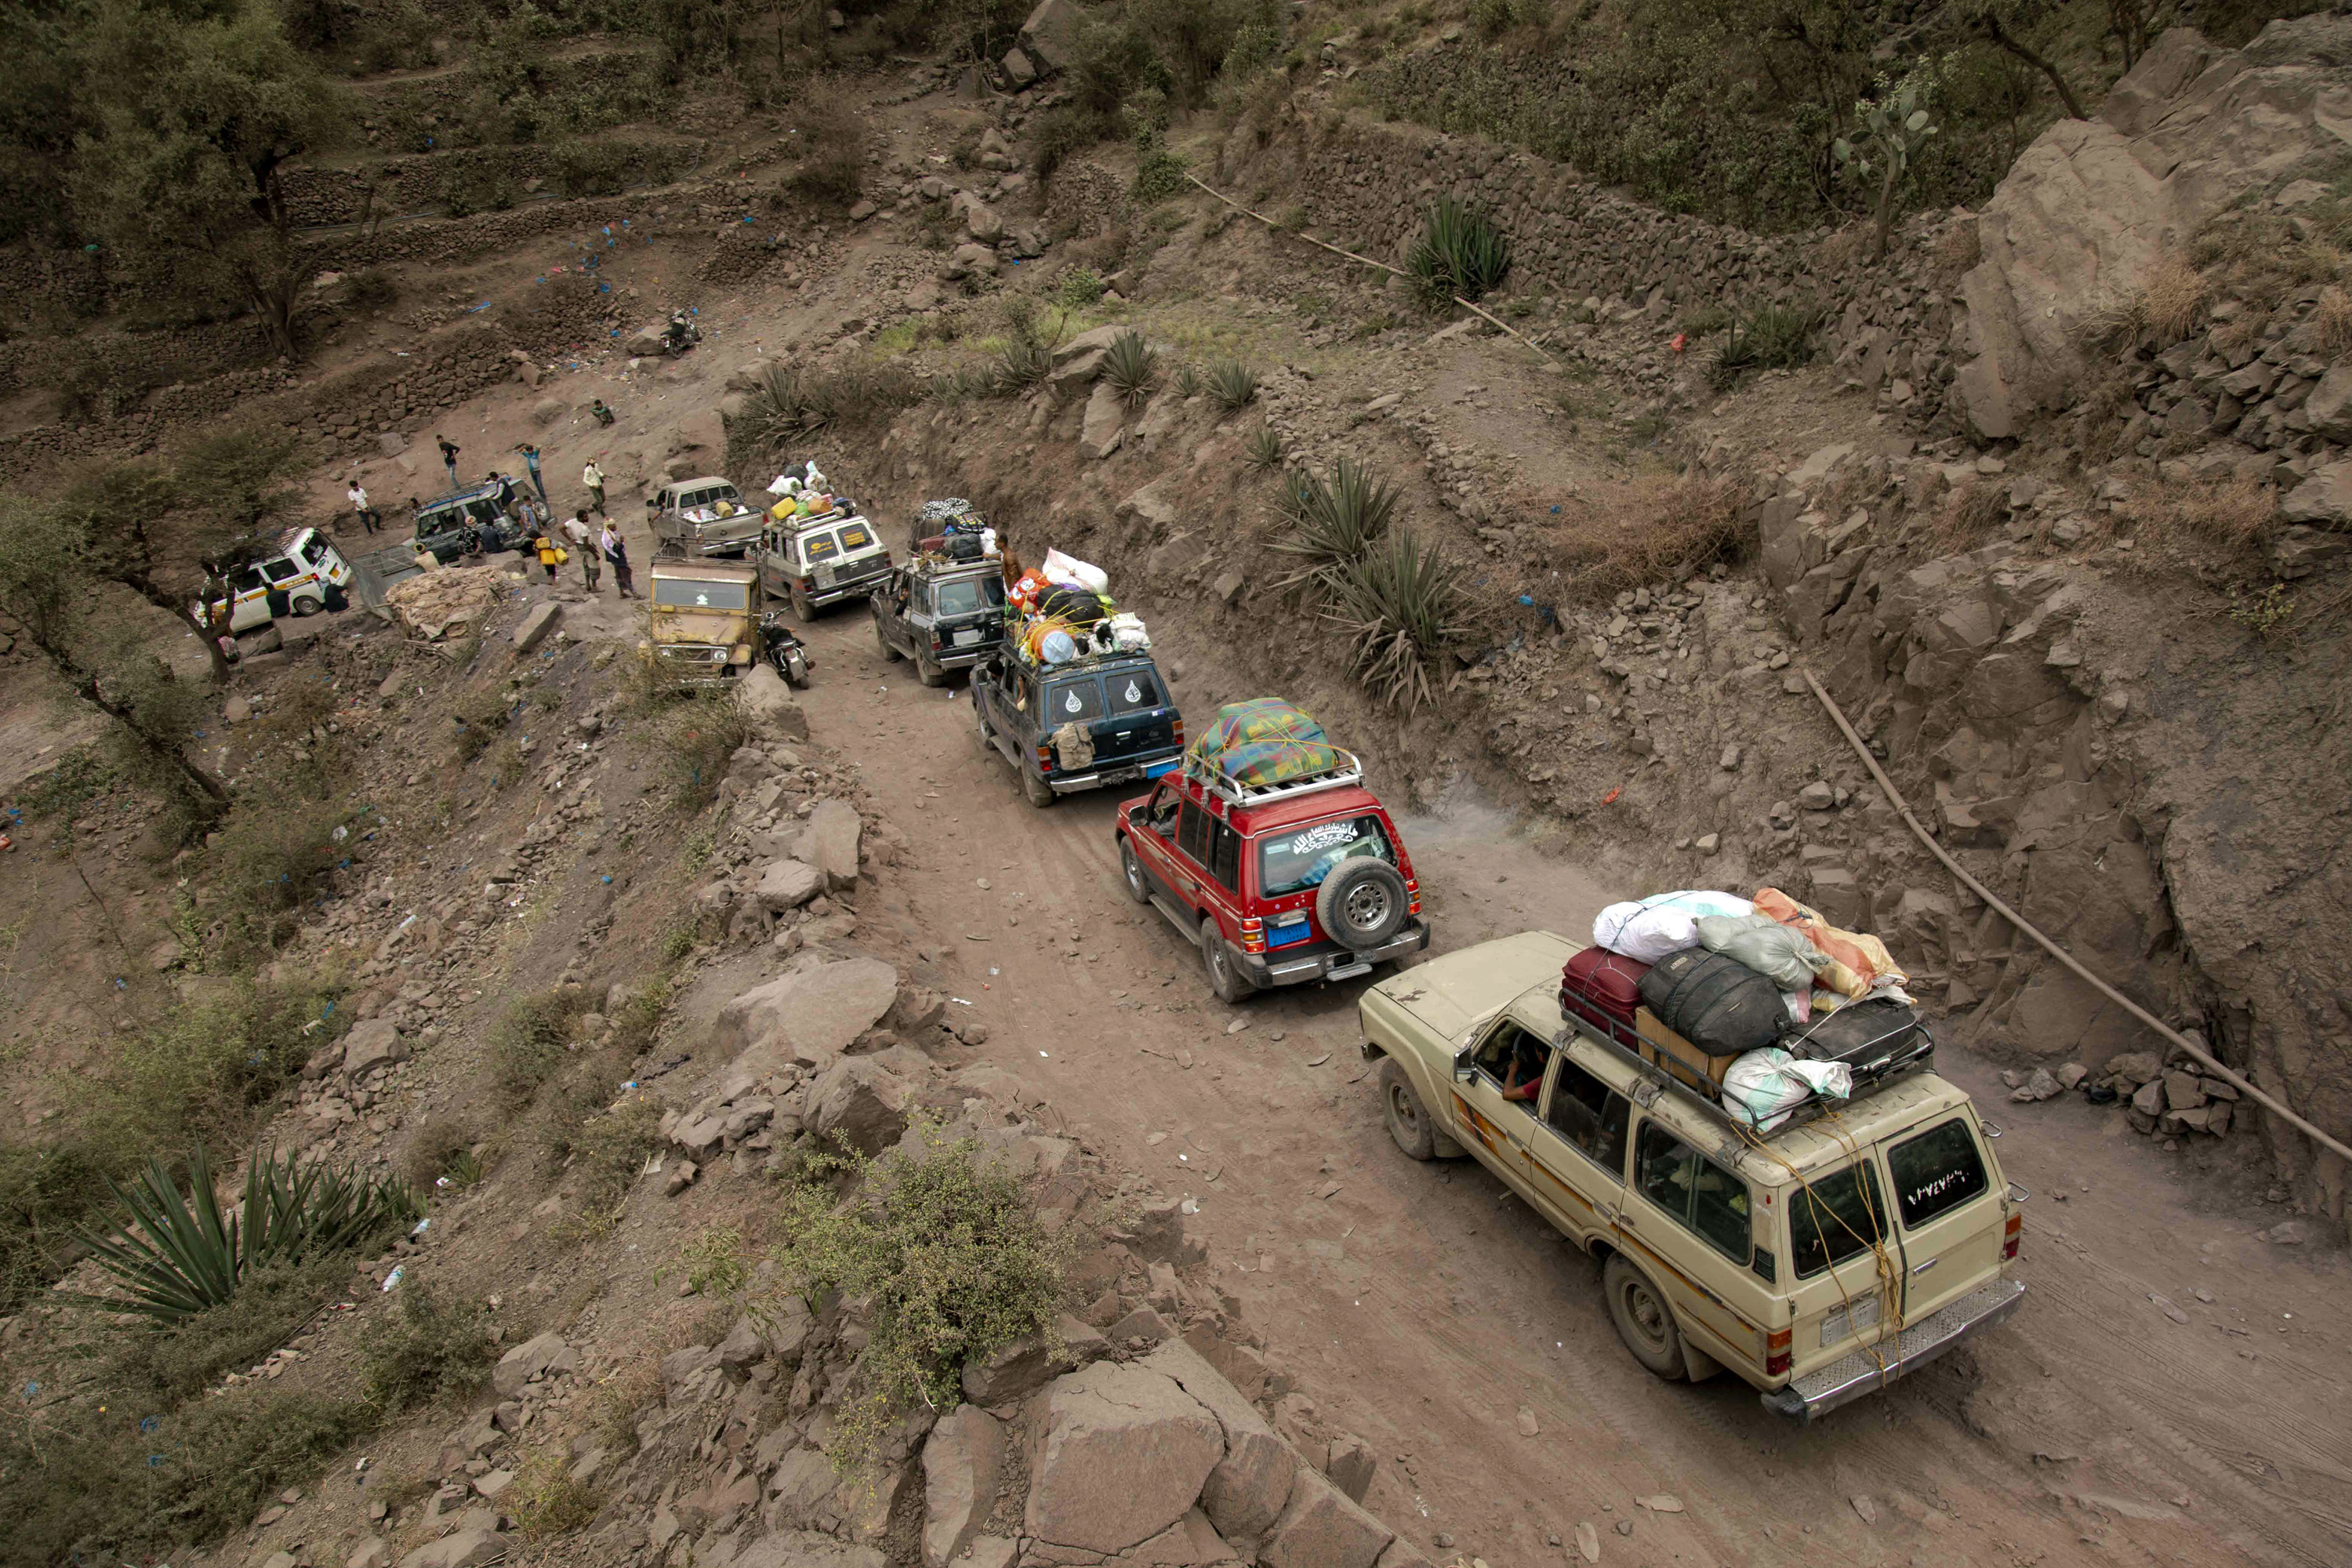 Photo above: Traffic on a heavily damaged narrow road that serves as a lifeline between Taiz, besieged by the Houthis, and the southern port of Aden, on July 8, 2022. Photo by AHMAD AL-BASHA/AFP via Getty Images.